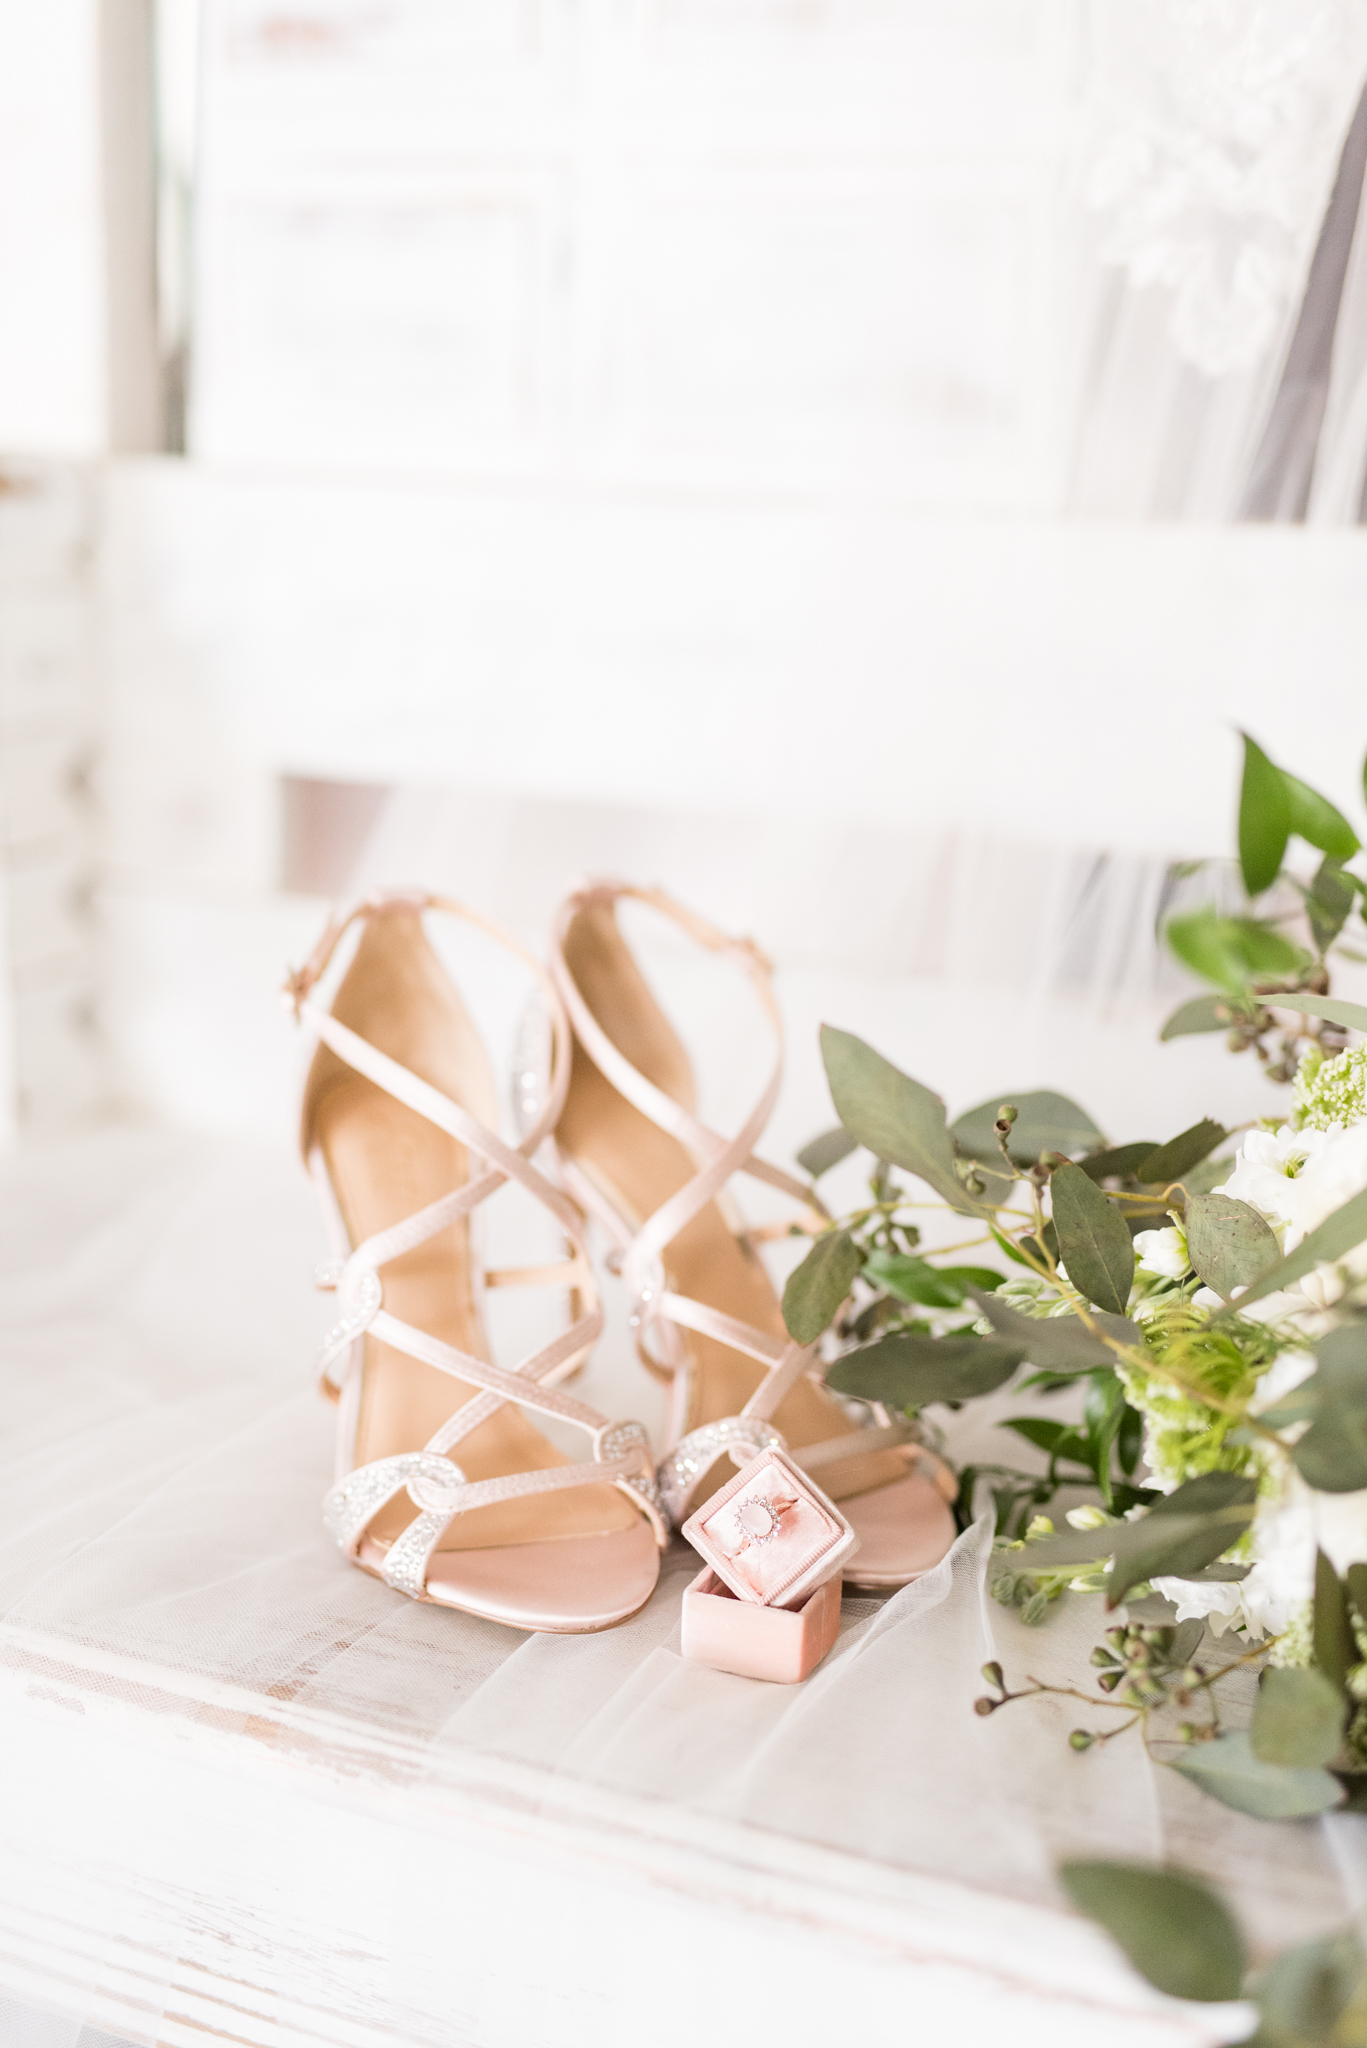 Shoes, wedding ring, and bouquet 